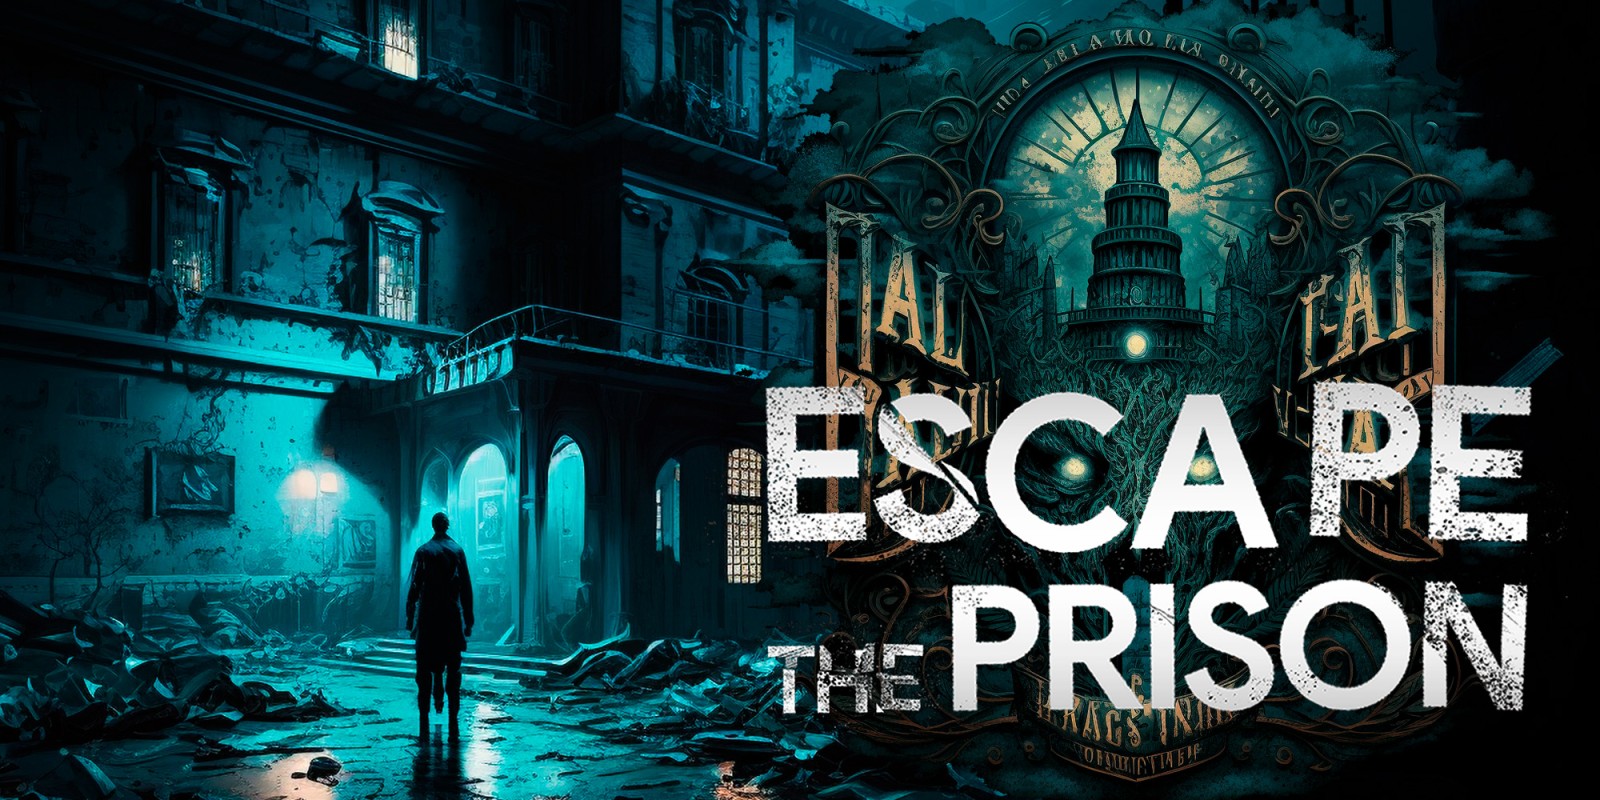 escape-the-prison-3-days-to-freedom-nintendo-switch-download-software-games-nintendo